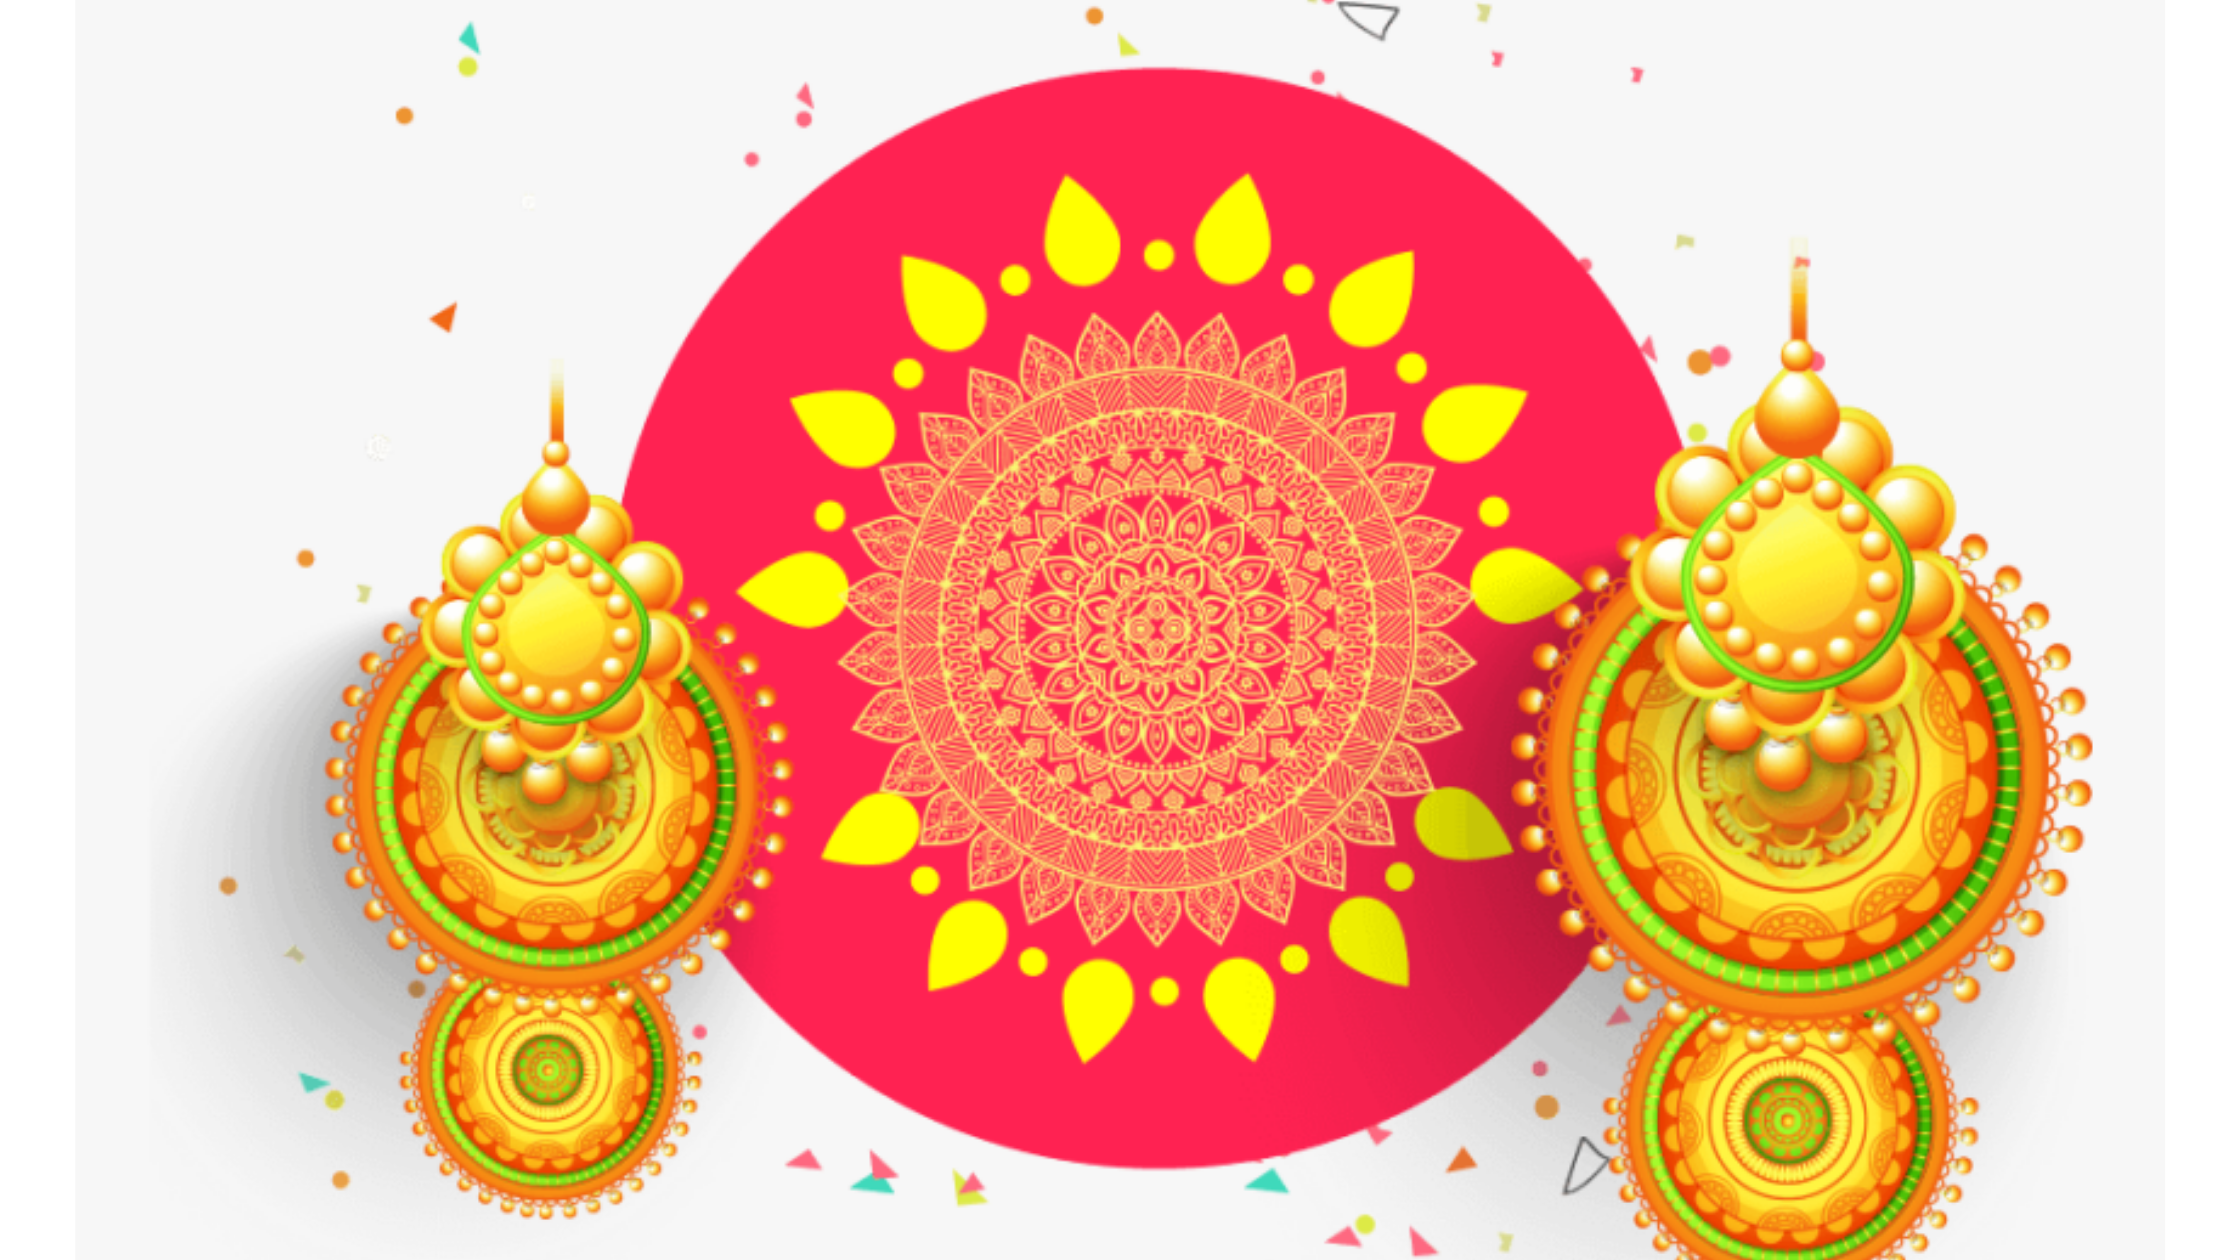 5 things to avoid during Dhanteras